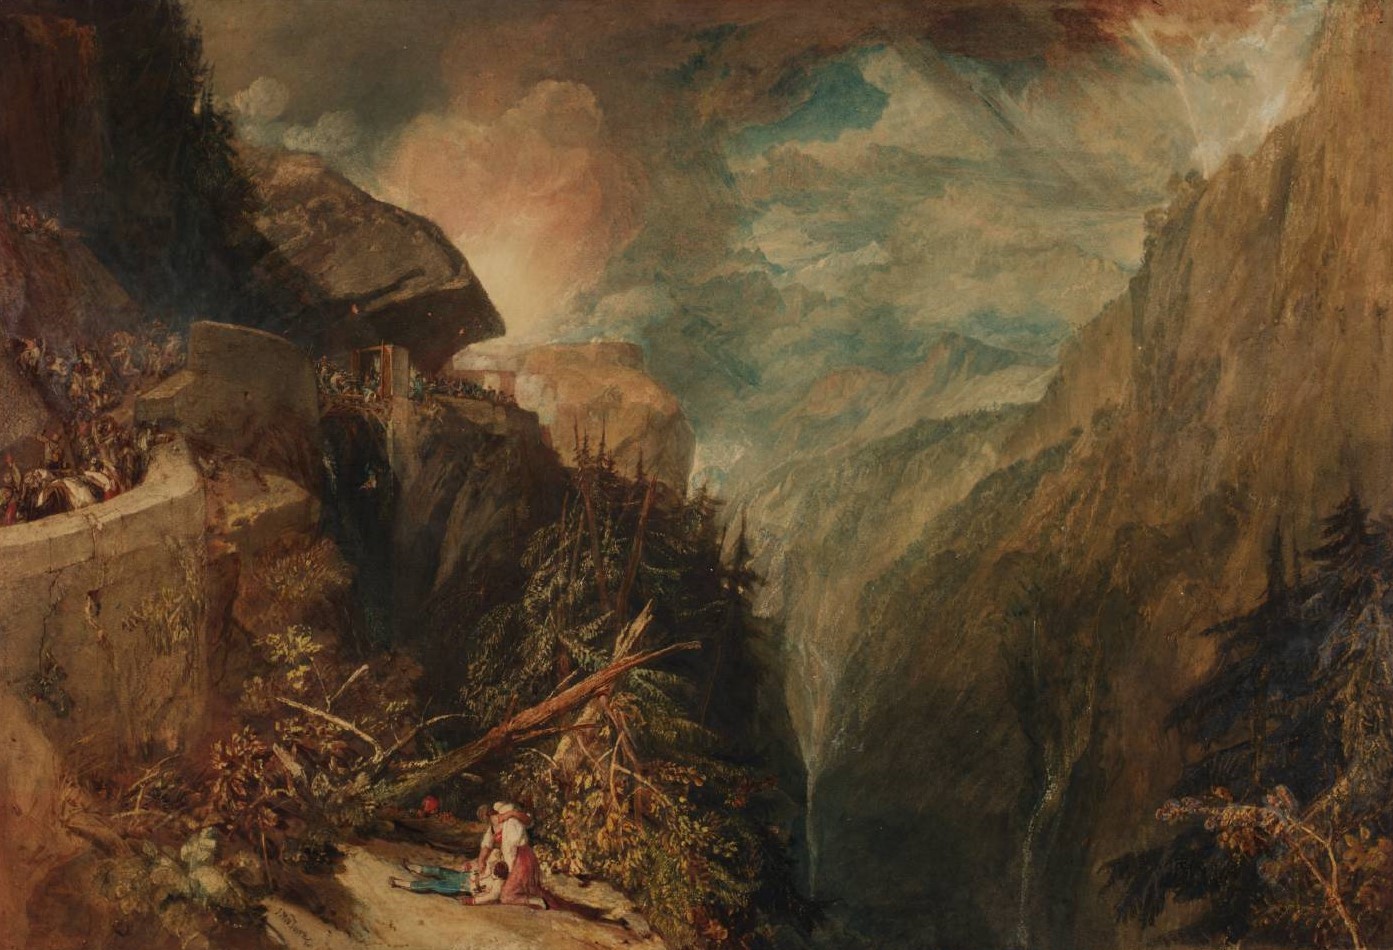 The Battle of Fort Rock, Val d'Aouste, Piedmont, 1796 exhibited 1815 by Joseph Mallord William Turner 1775-1851